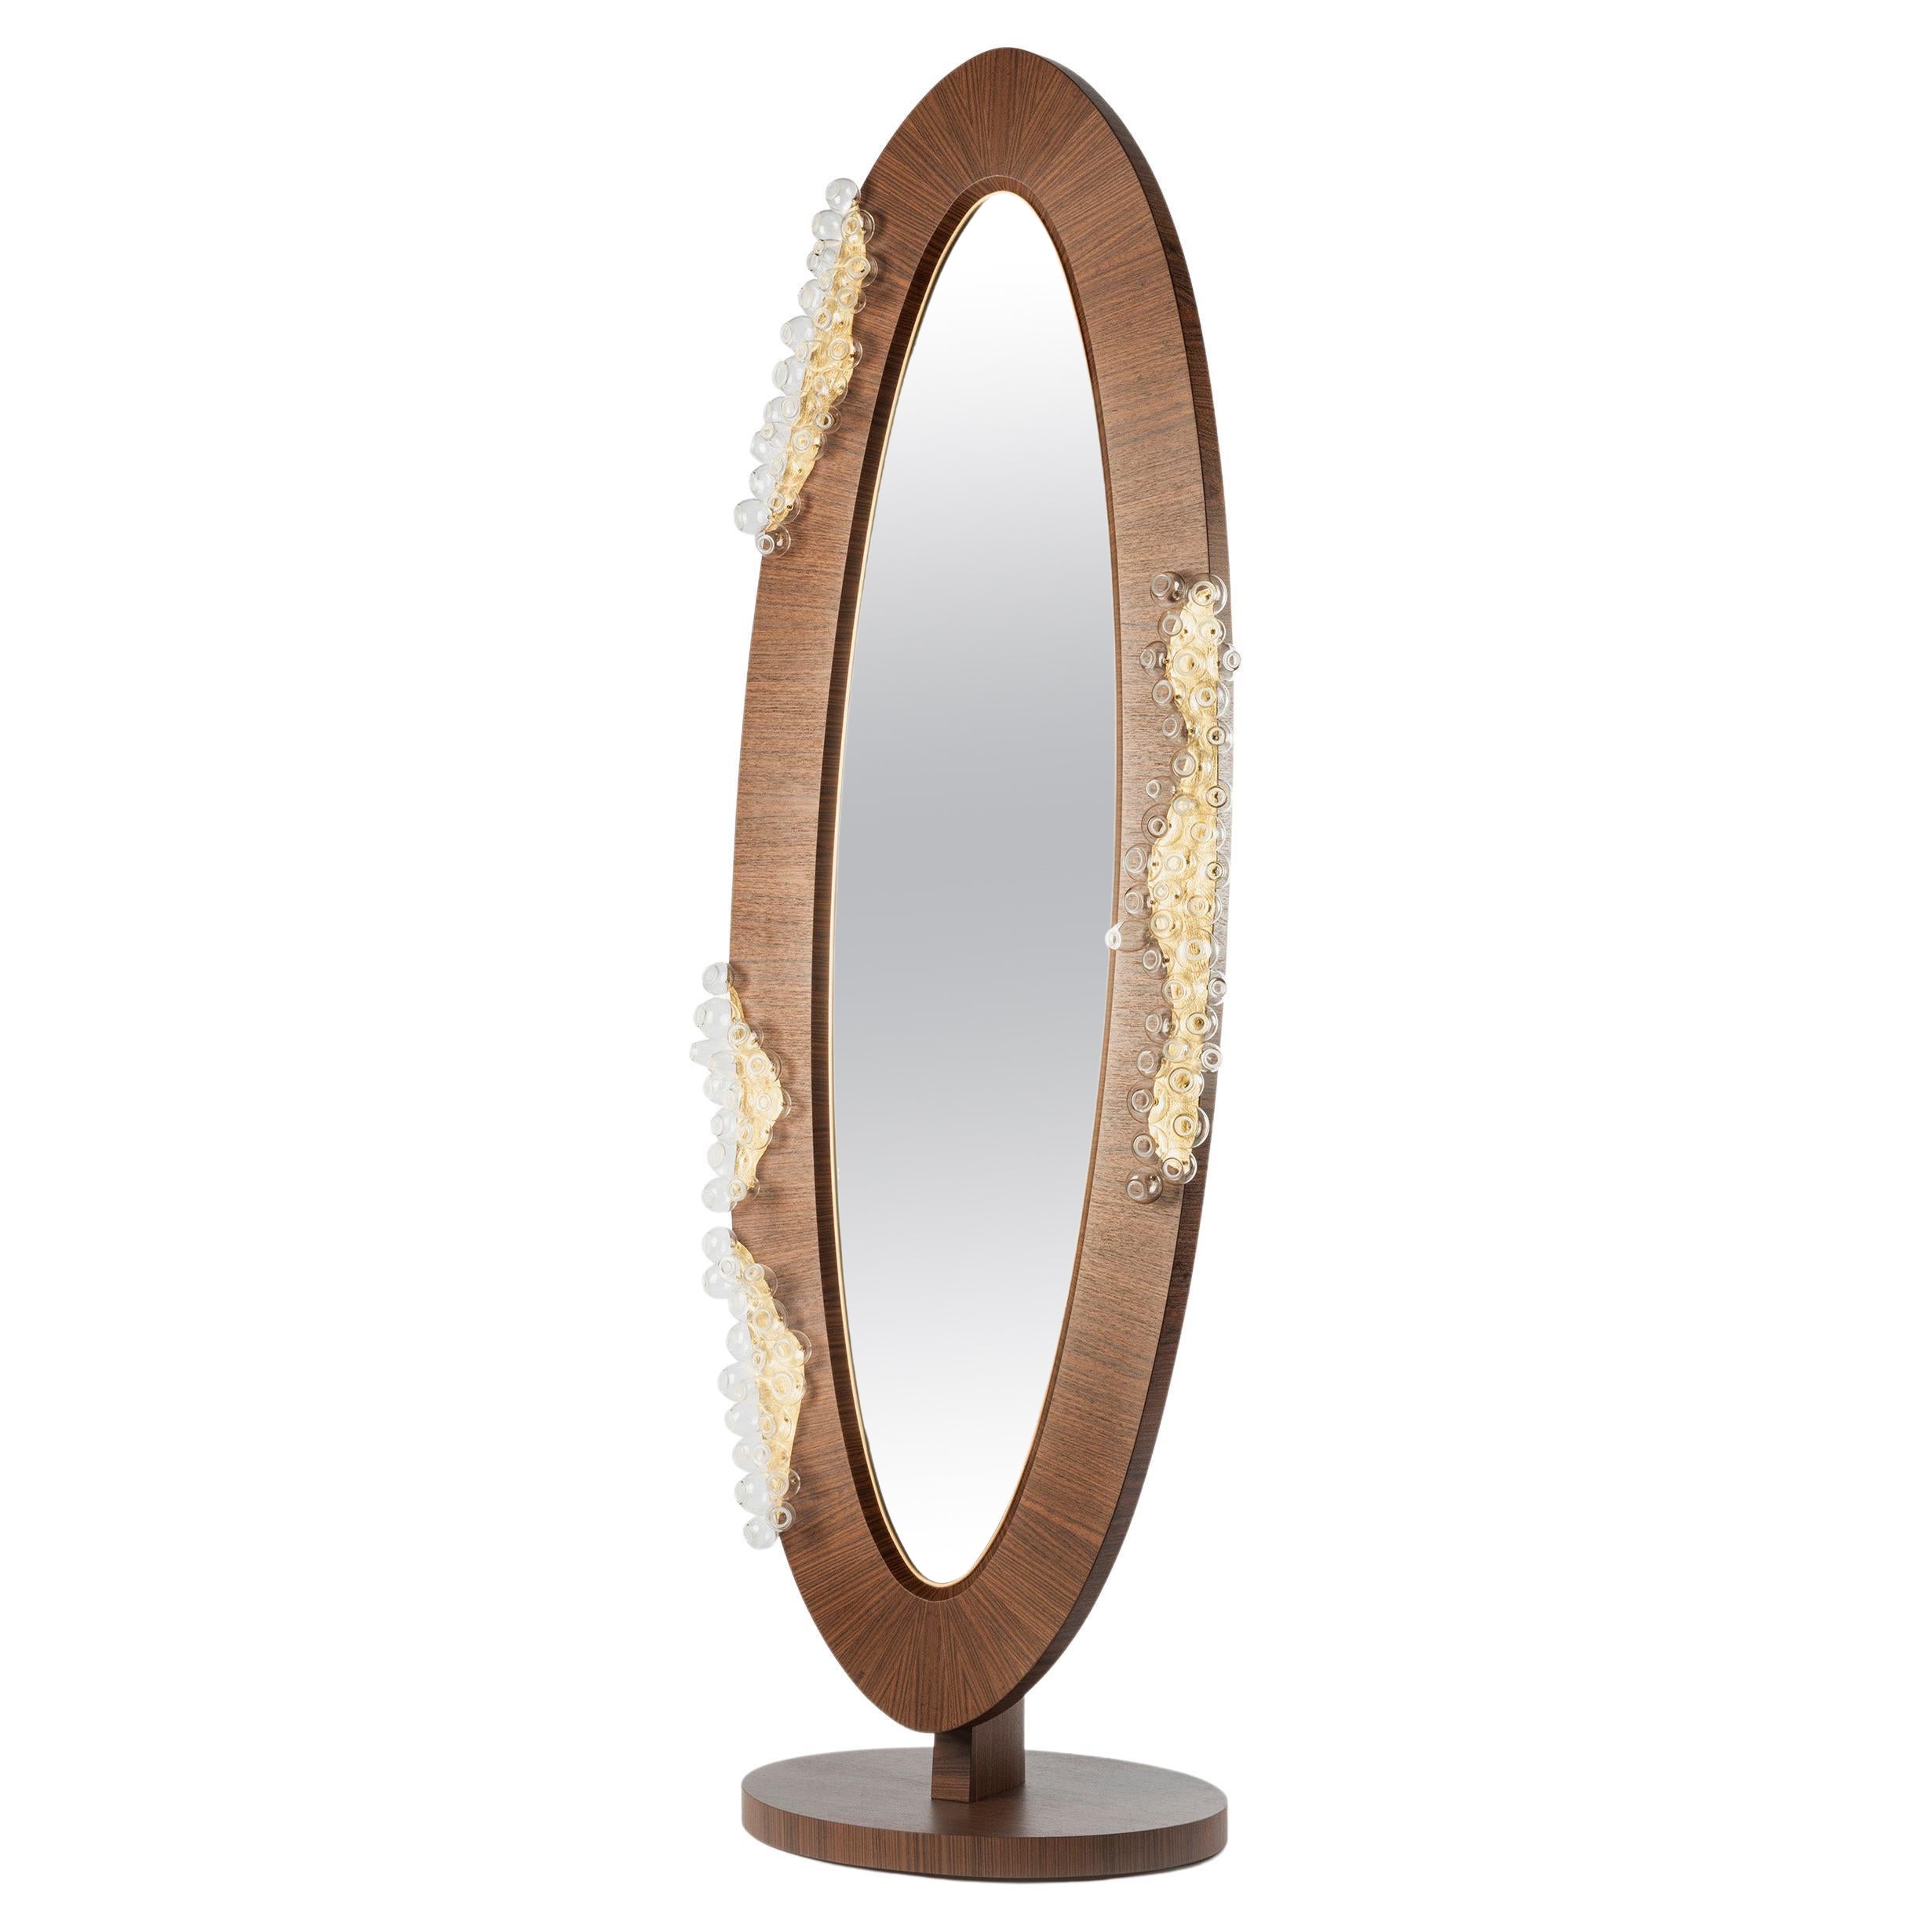 Grimilde Walnut and Glass Floor Mirror by Giordano Viganò and Simone Crestani For Sale